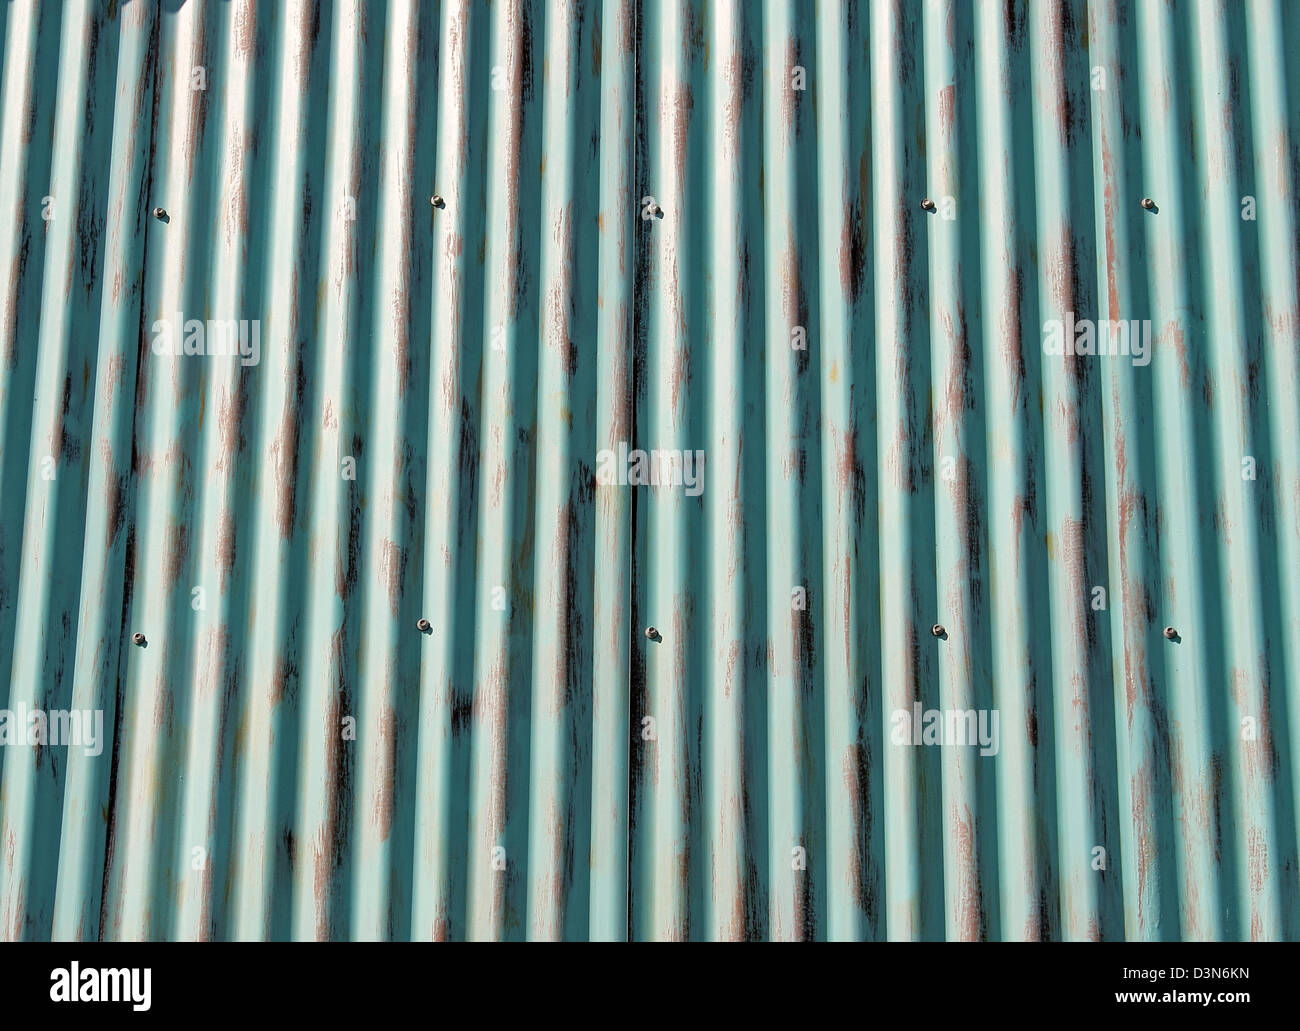 Protective sheets of corrugated aluminum sheeting screwed together as a background. Stock Photo